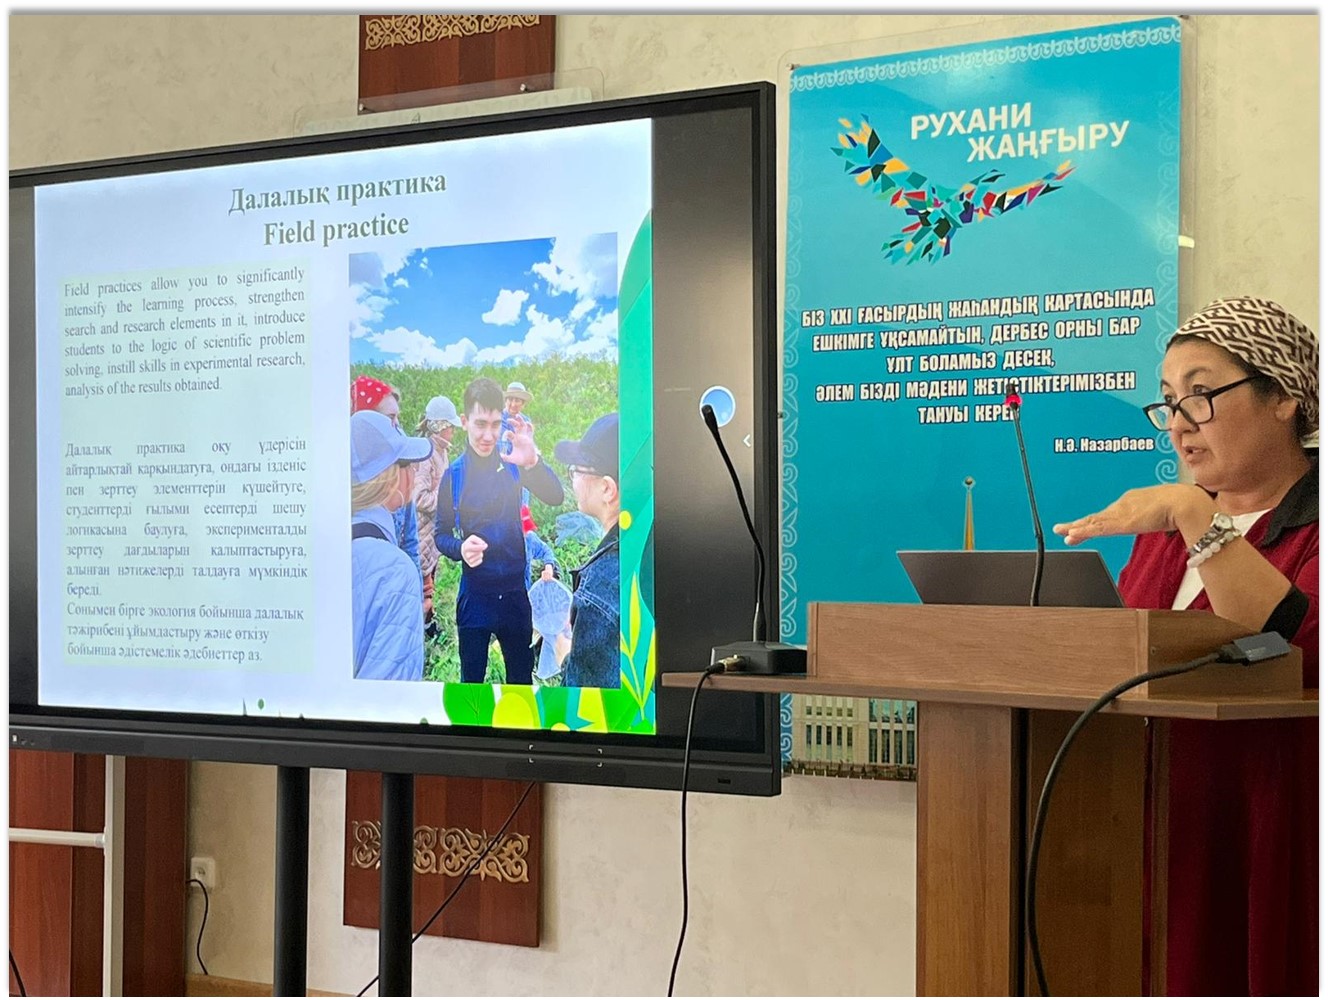 Lecturer providing overview of upcoming fieldwork session as part of the Advancing Key Curriculums of Ecology and Environmental Sciences for Regional Universities in Kazakhstan and Beyond” program.